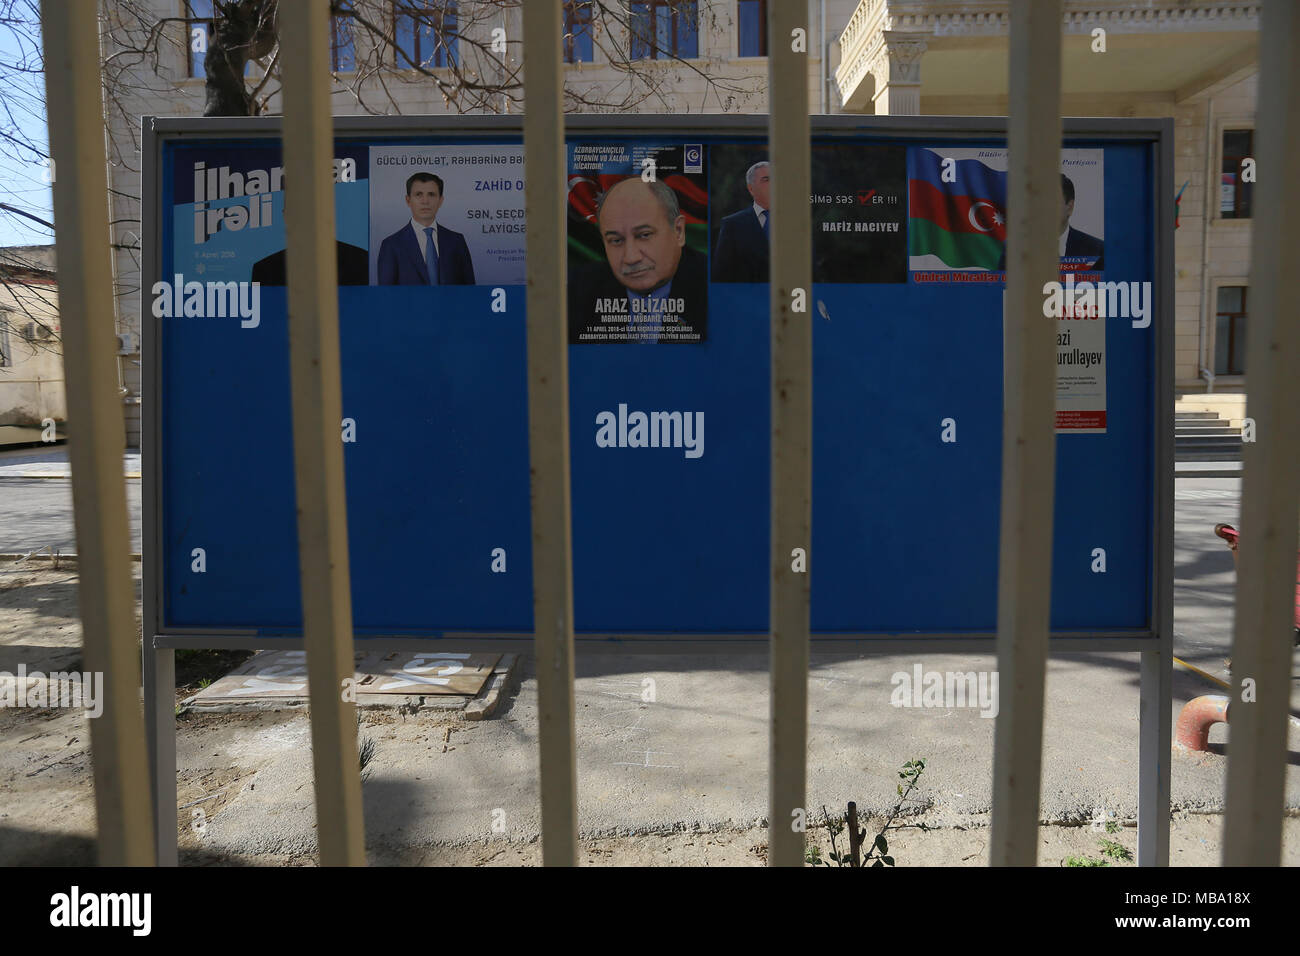 Election campaign posters promoting incumbent president Ilham Aliyev, presidential and other presidential candidates; Azerbaijan is to hold a presidential election 11 April 2018. Credit: Aziz Karimov/Alamy Live News Stock Photo